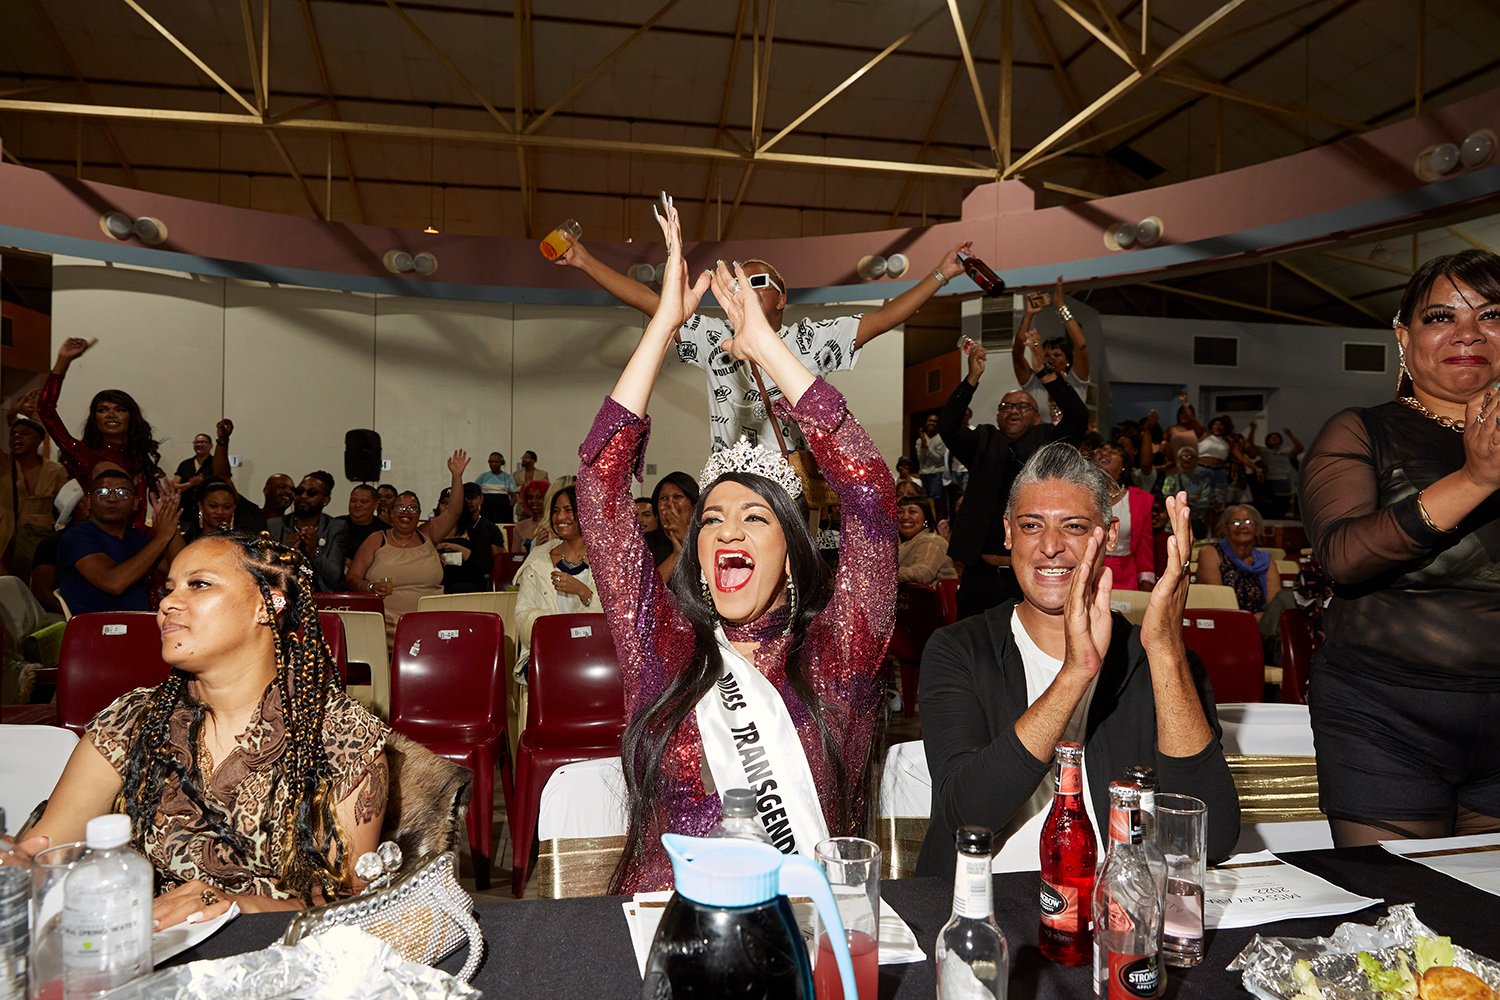  Taking a break from her duties as head judge, Chedino cheers as drag queen Emogen Moore performs during the Miss Gay Arabella beauty pageant, Grassy Park Civic Centre, Cape Town, 2022.  An experienced queen herself, Chedino is often asked to judge p